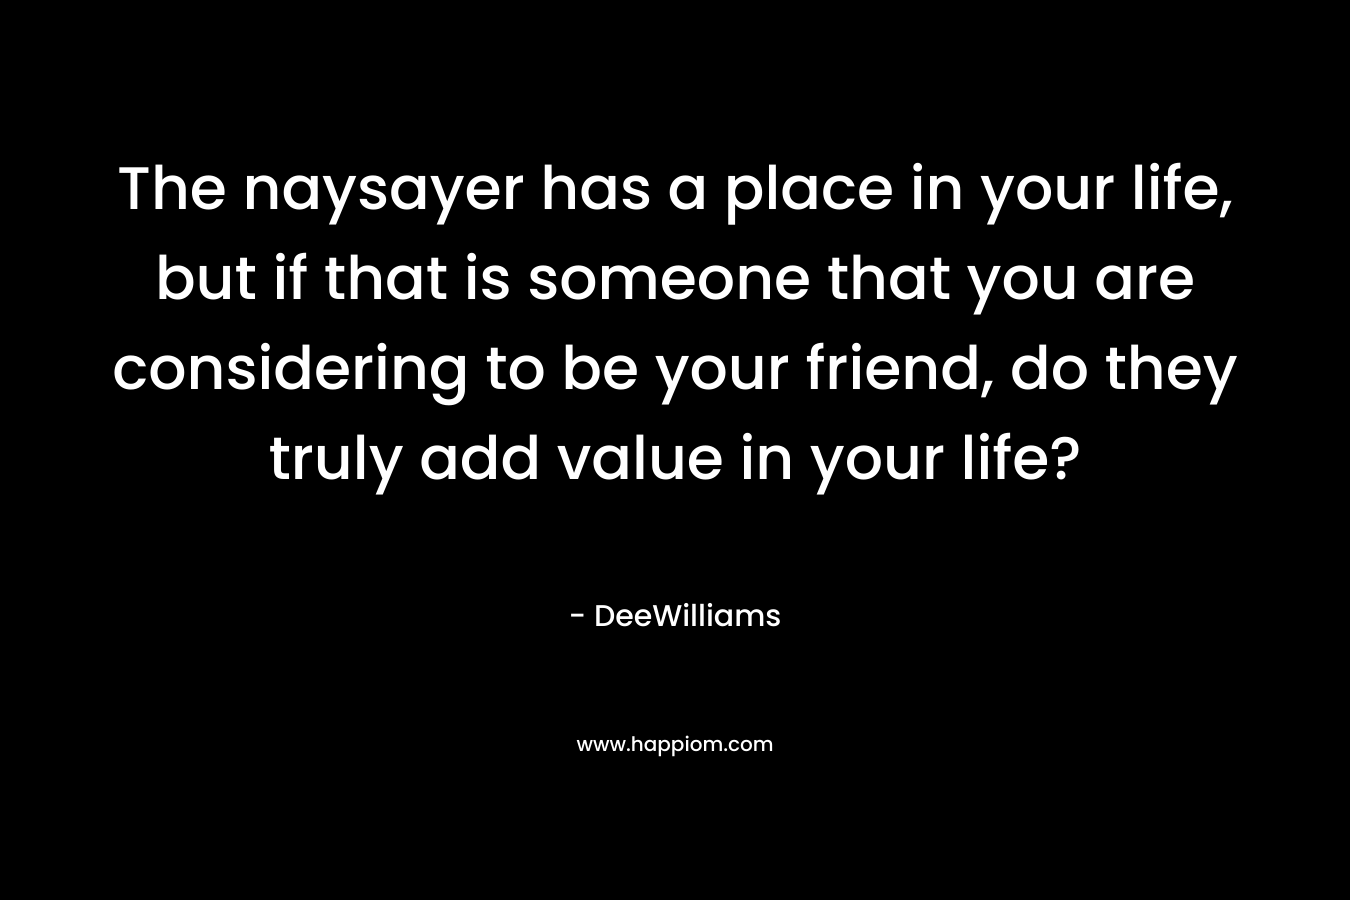 The naysayer has a place in your life, but if that is someone that you are considering to be your friend, do they truly add value in your life?